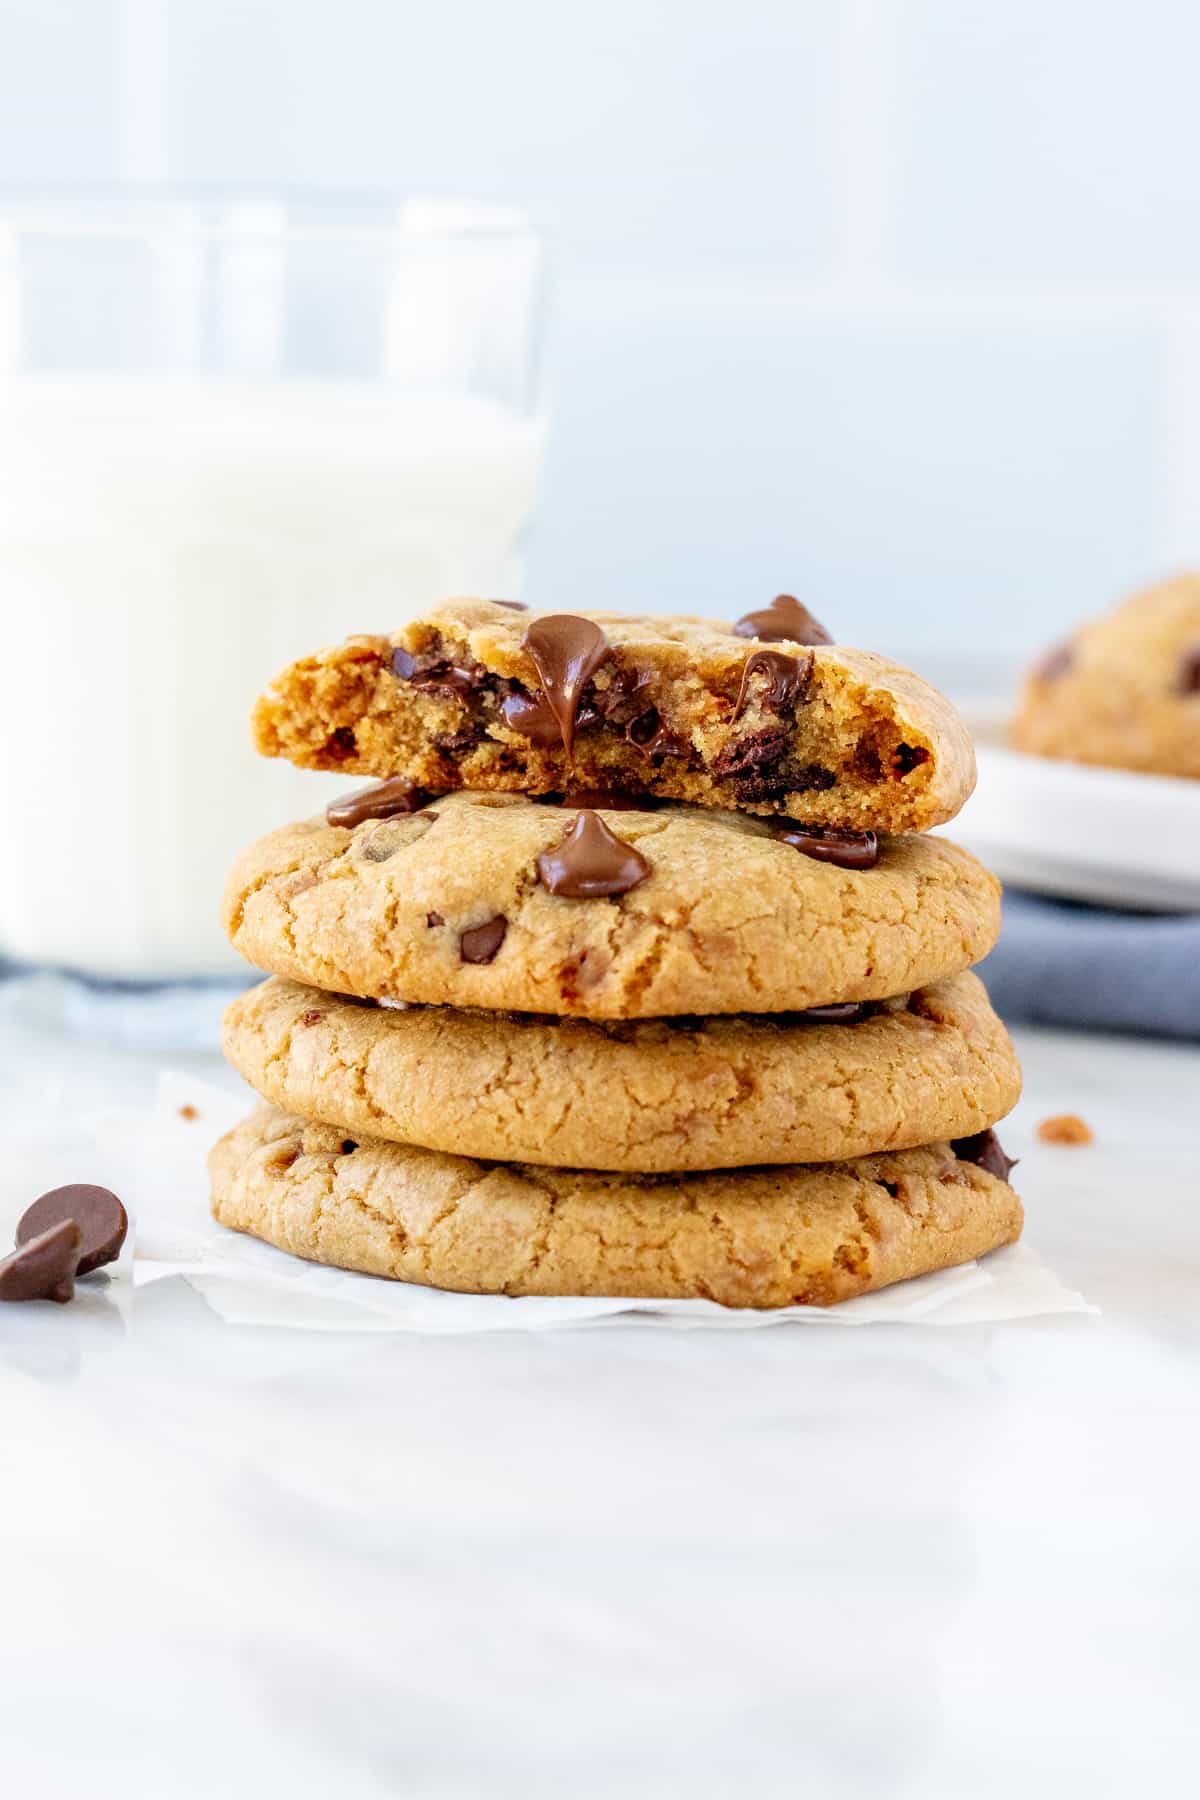 Stack of toffee chocolate chip cookies, with top cookie broken in half